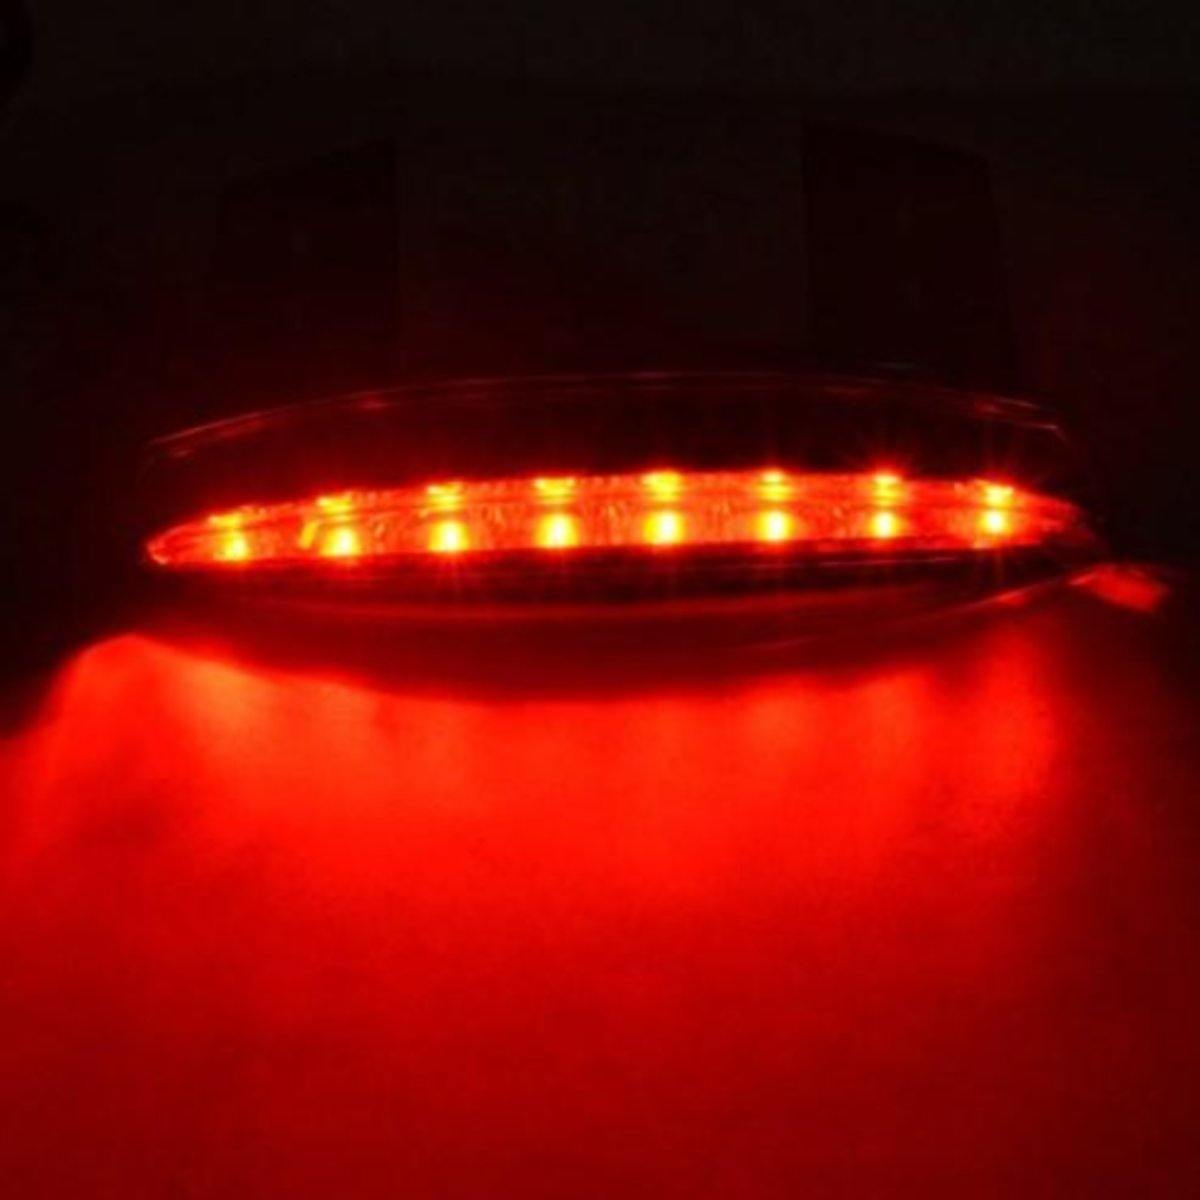 Motorcycle Red Lens Chopped Rear Fender Tail 0.18W LED Light, PC/ABS, 12V - American Legend Rider